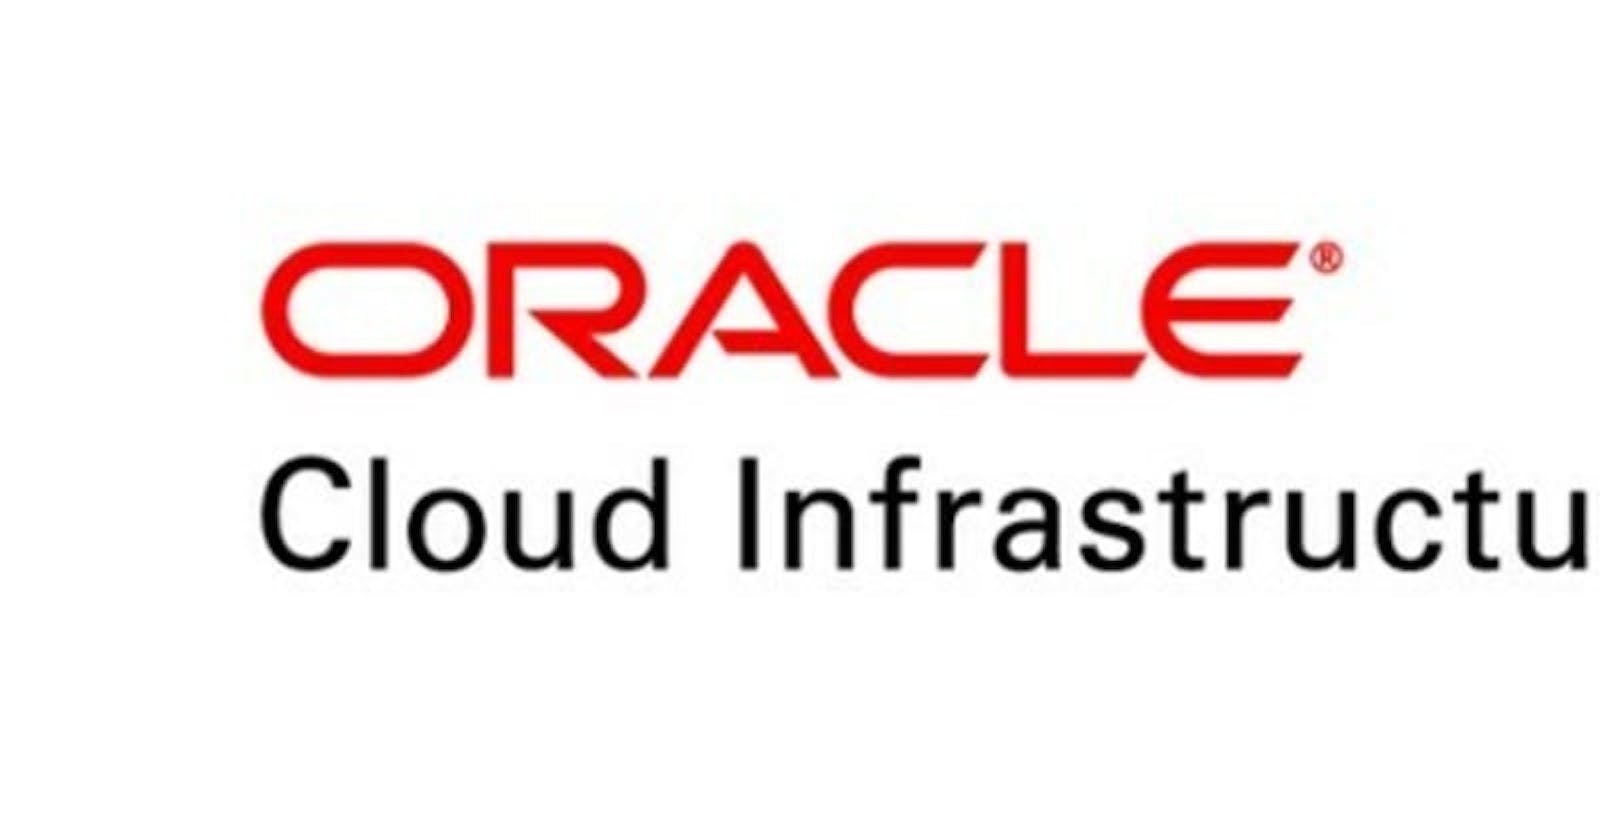 How to Get Oracle Cloud Infrastructure (OCI) Certified ???